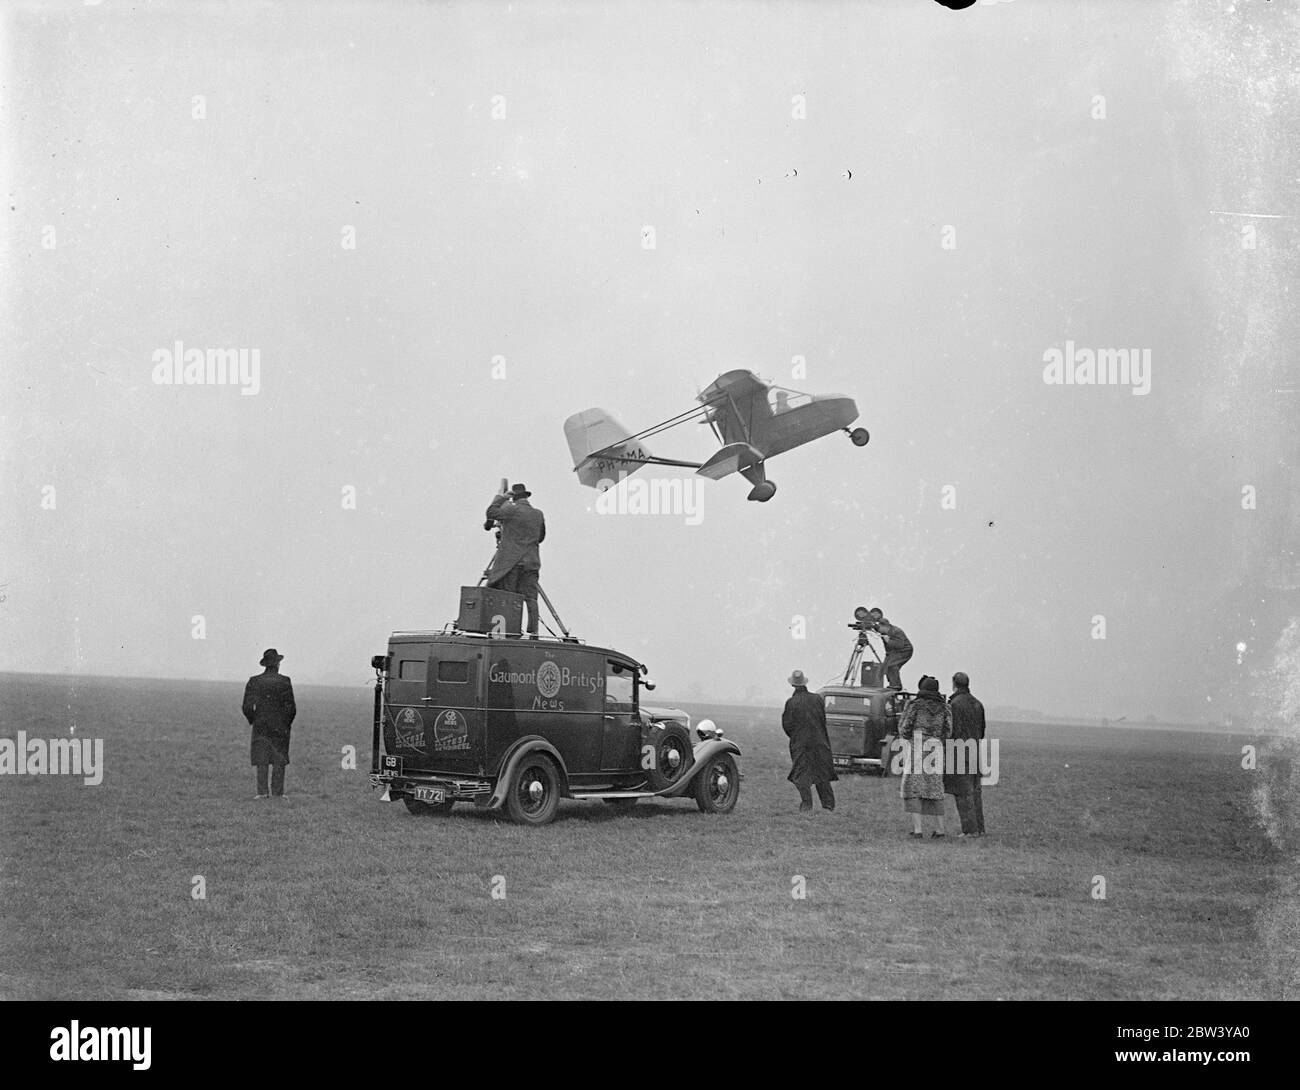 Fool-proof flights plane crashes at Gravesend Demonstration - pilot trapped in wreckage. The first demonstration in England of the Schelemusch, a Dutch light plane said to be full-proof, ended in a crash at Gravesend Aerodrome. The plane was piloted by Mr R. G. Doig who was injured. The machine was flying low and trying to make a sharp turn when it was caught by a gust of wind and completely wrecked. Mr Doig's leg was caught in the wreckage, the pilot having to wait until rescuers could extricate him. The Schelemusch, a singles-seater, is fitted with a 40 horsepower twin cylinder engine of the Stock Photo